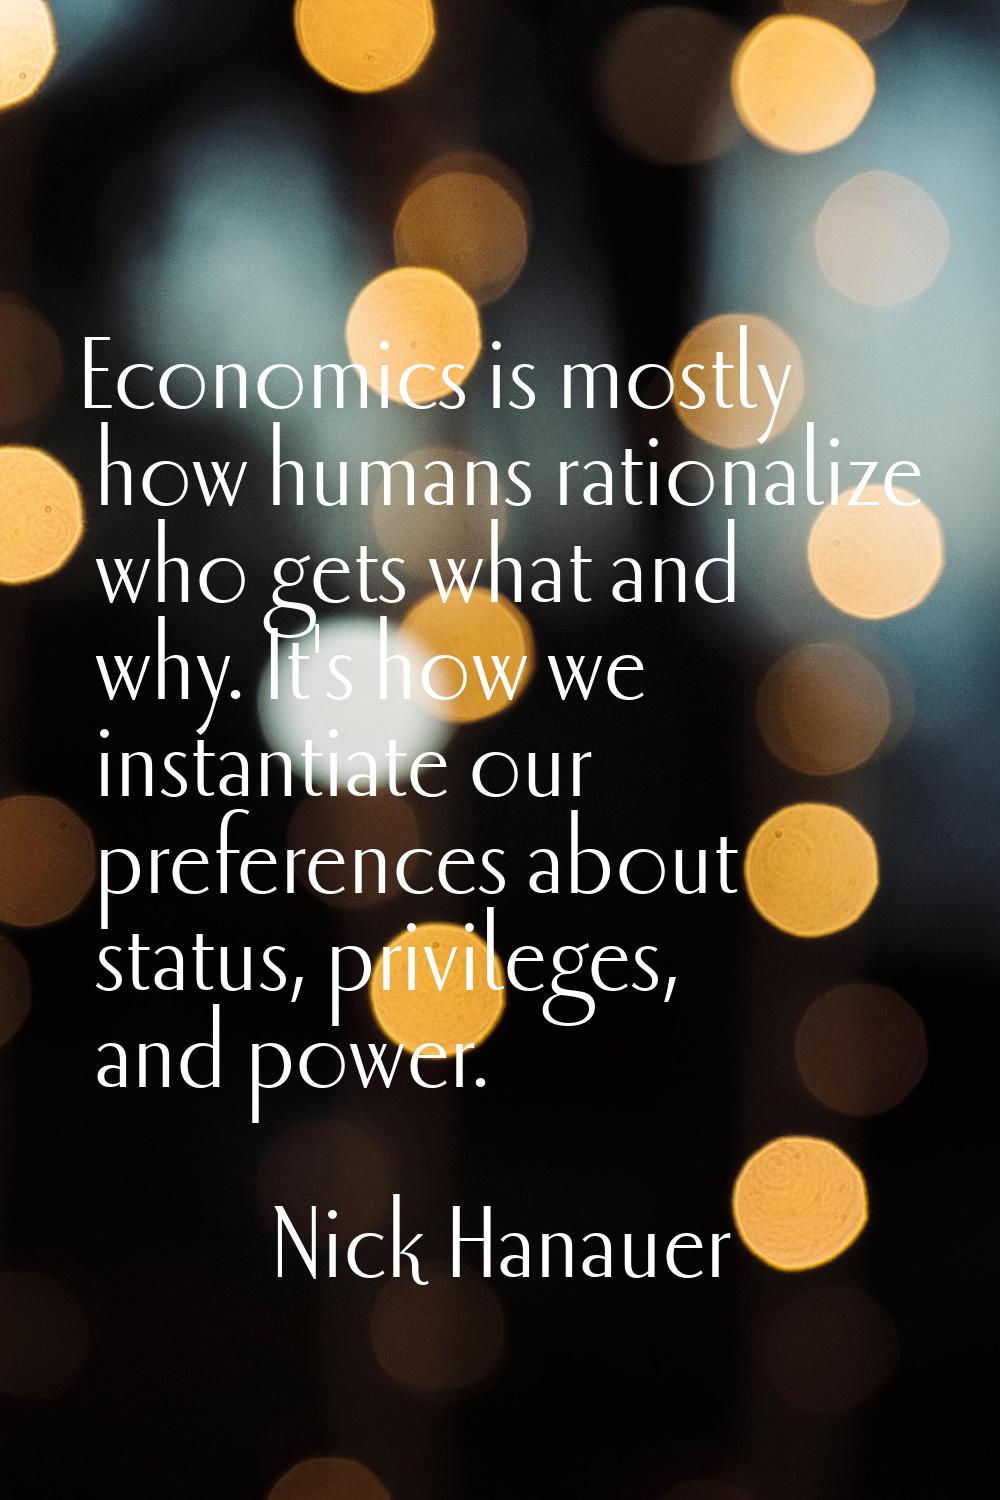 Economics is mostly how humans rationalize who gets what and why. It's how we instantiate our prefe